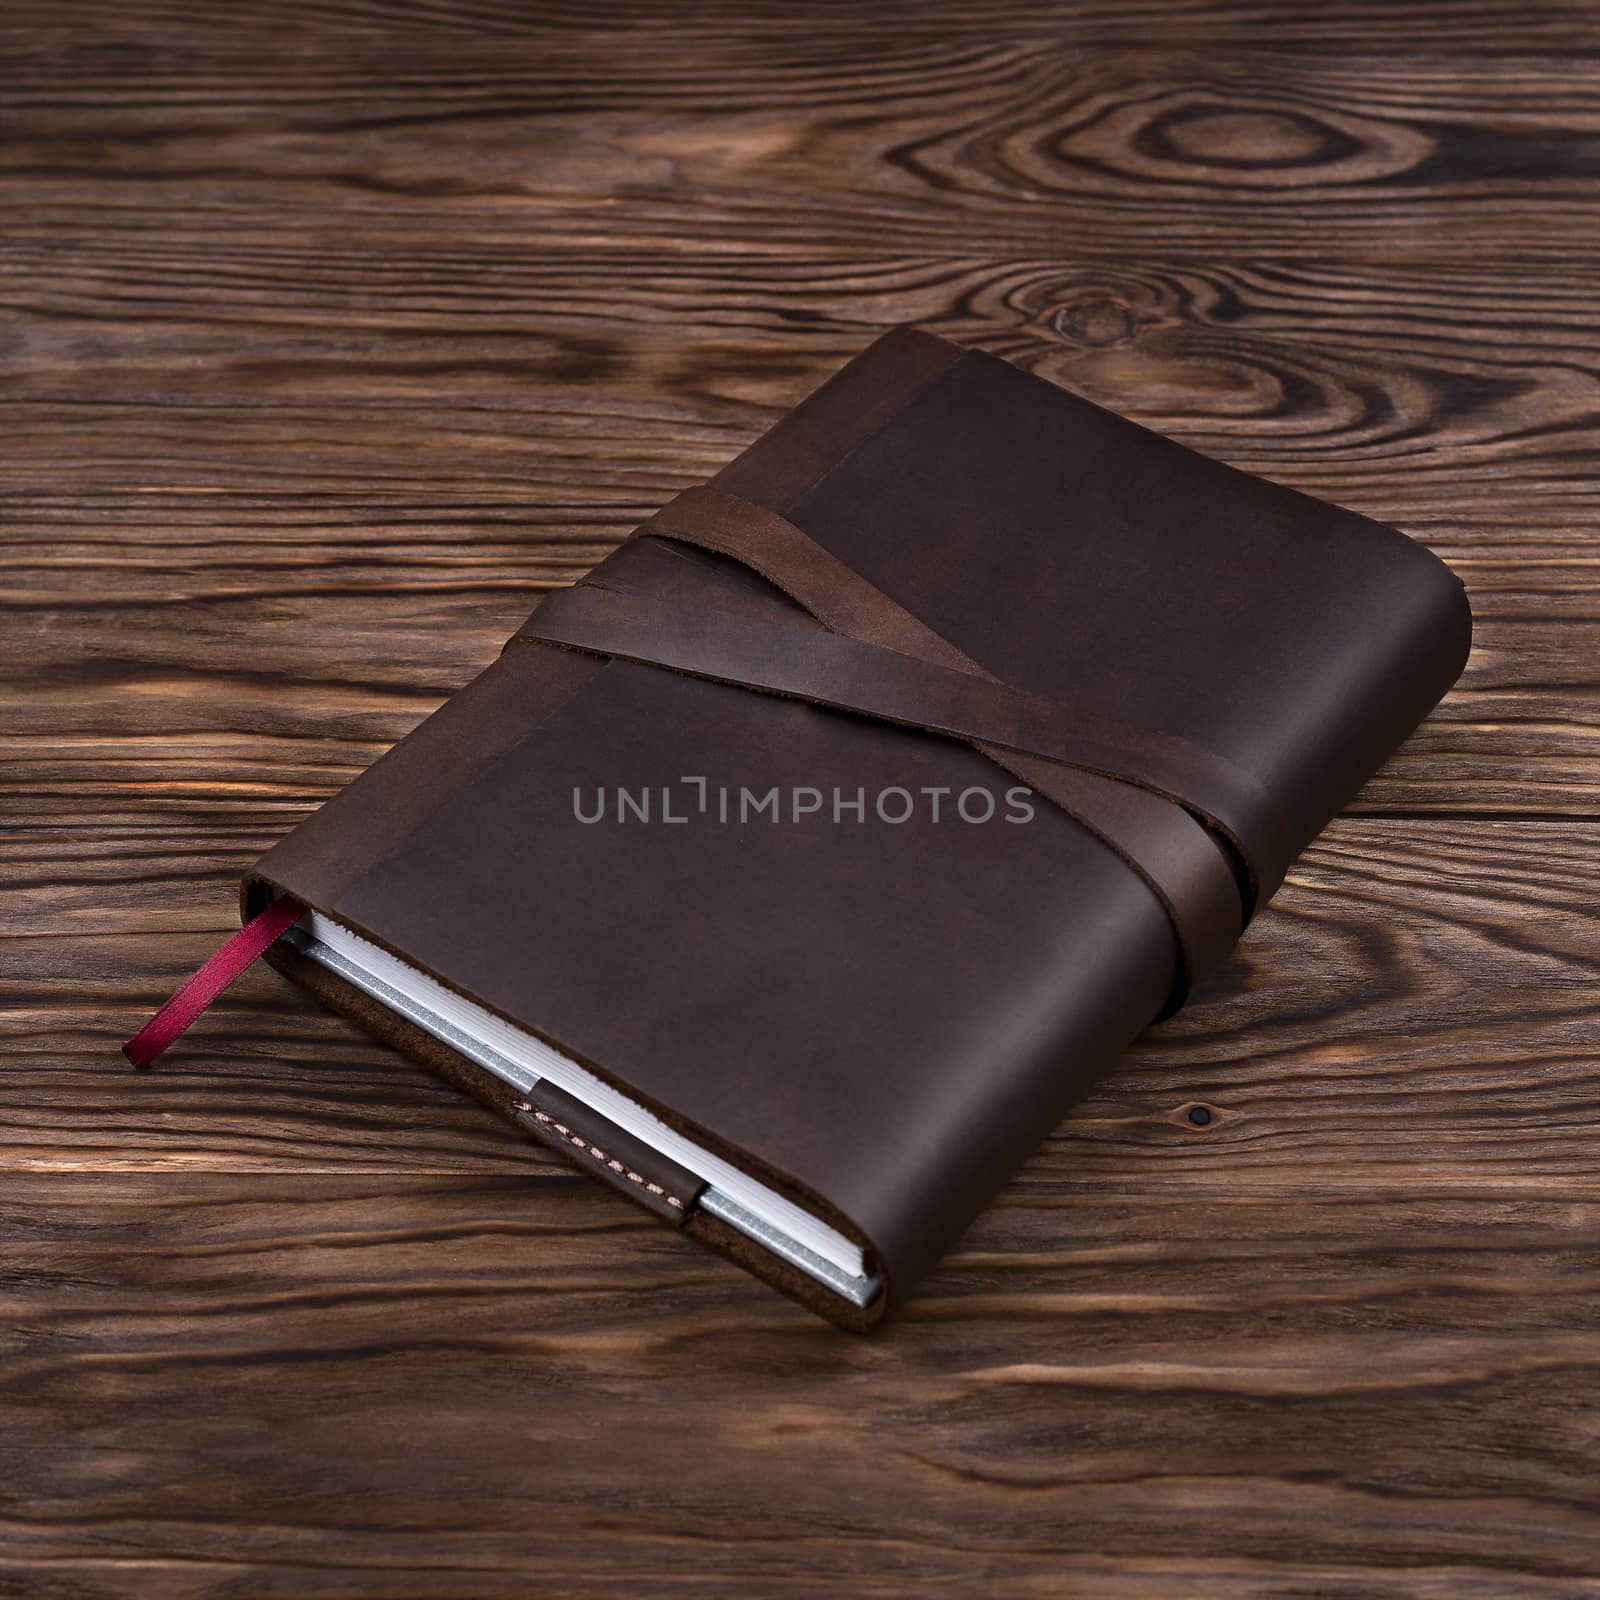 Brown handmade leather notebook cover with notebook inside on wooden background. Stock photo of luxury business accessories.